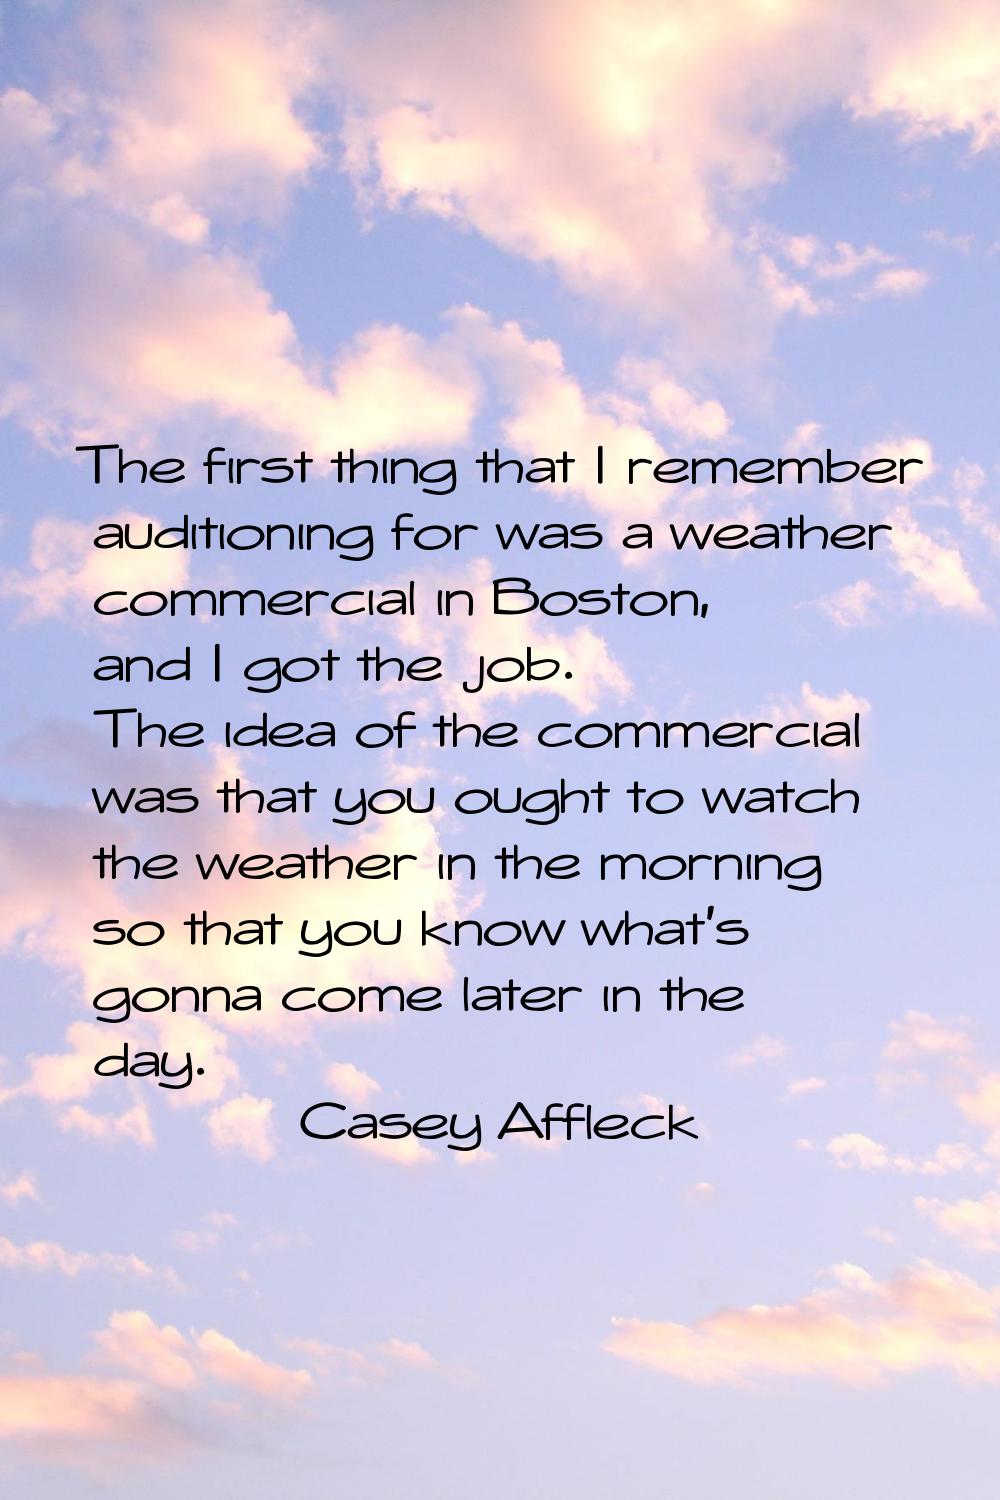 The first thing that I remember auditioning for was a weather commercial in Boston, and I got the j